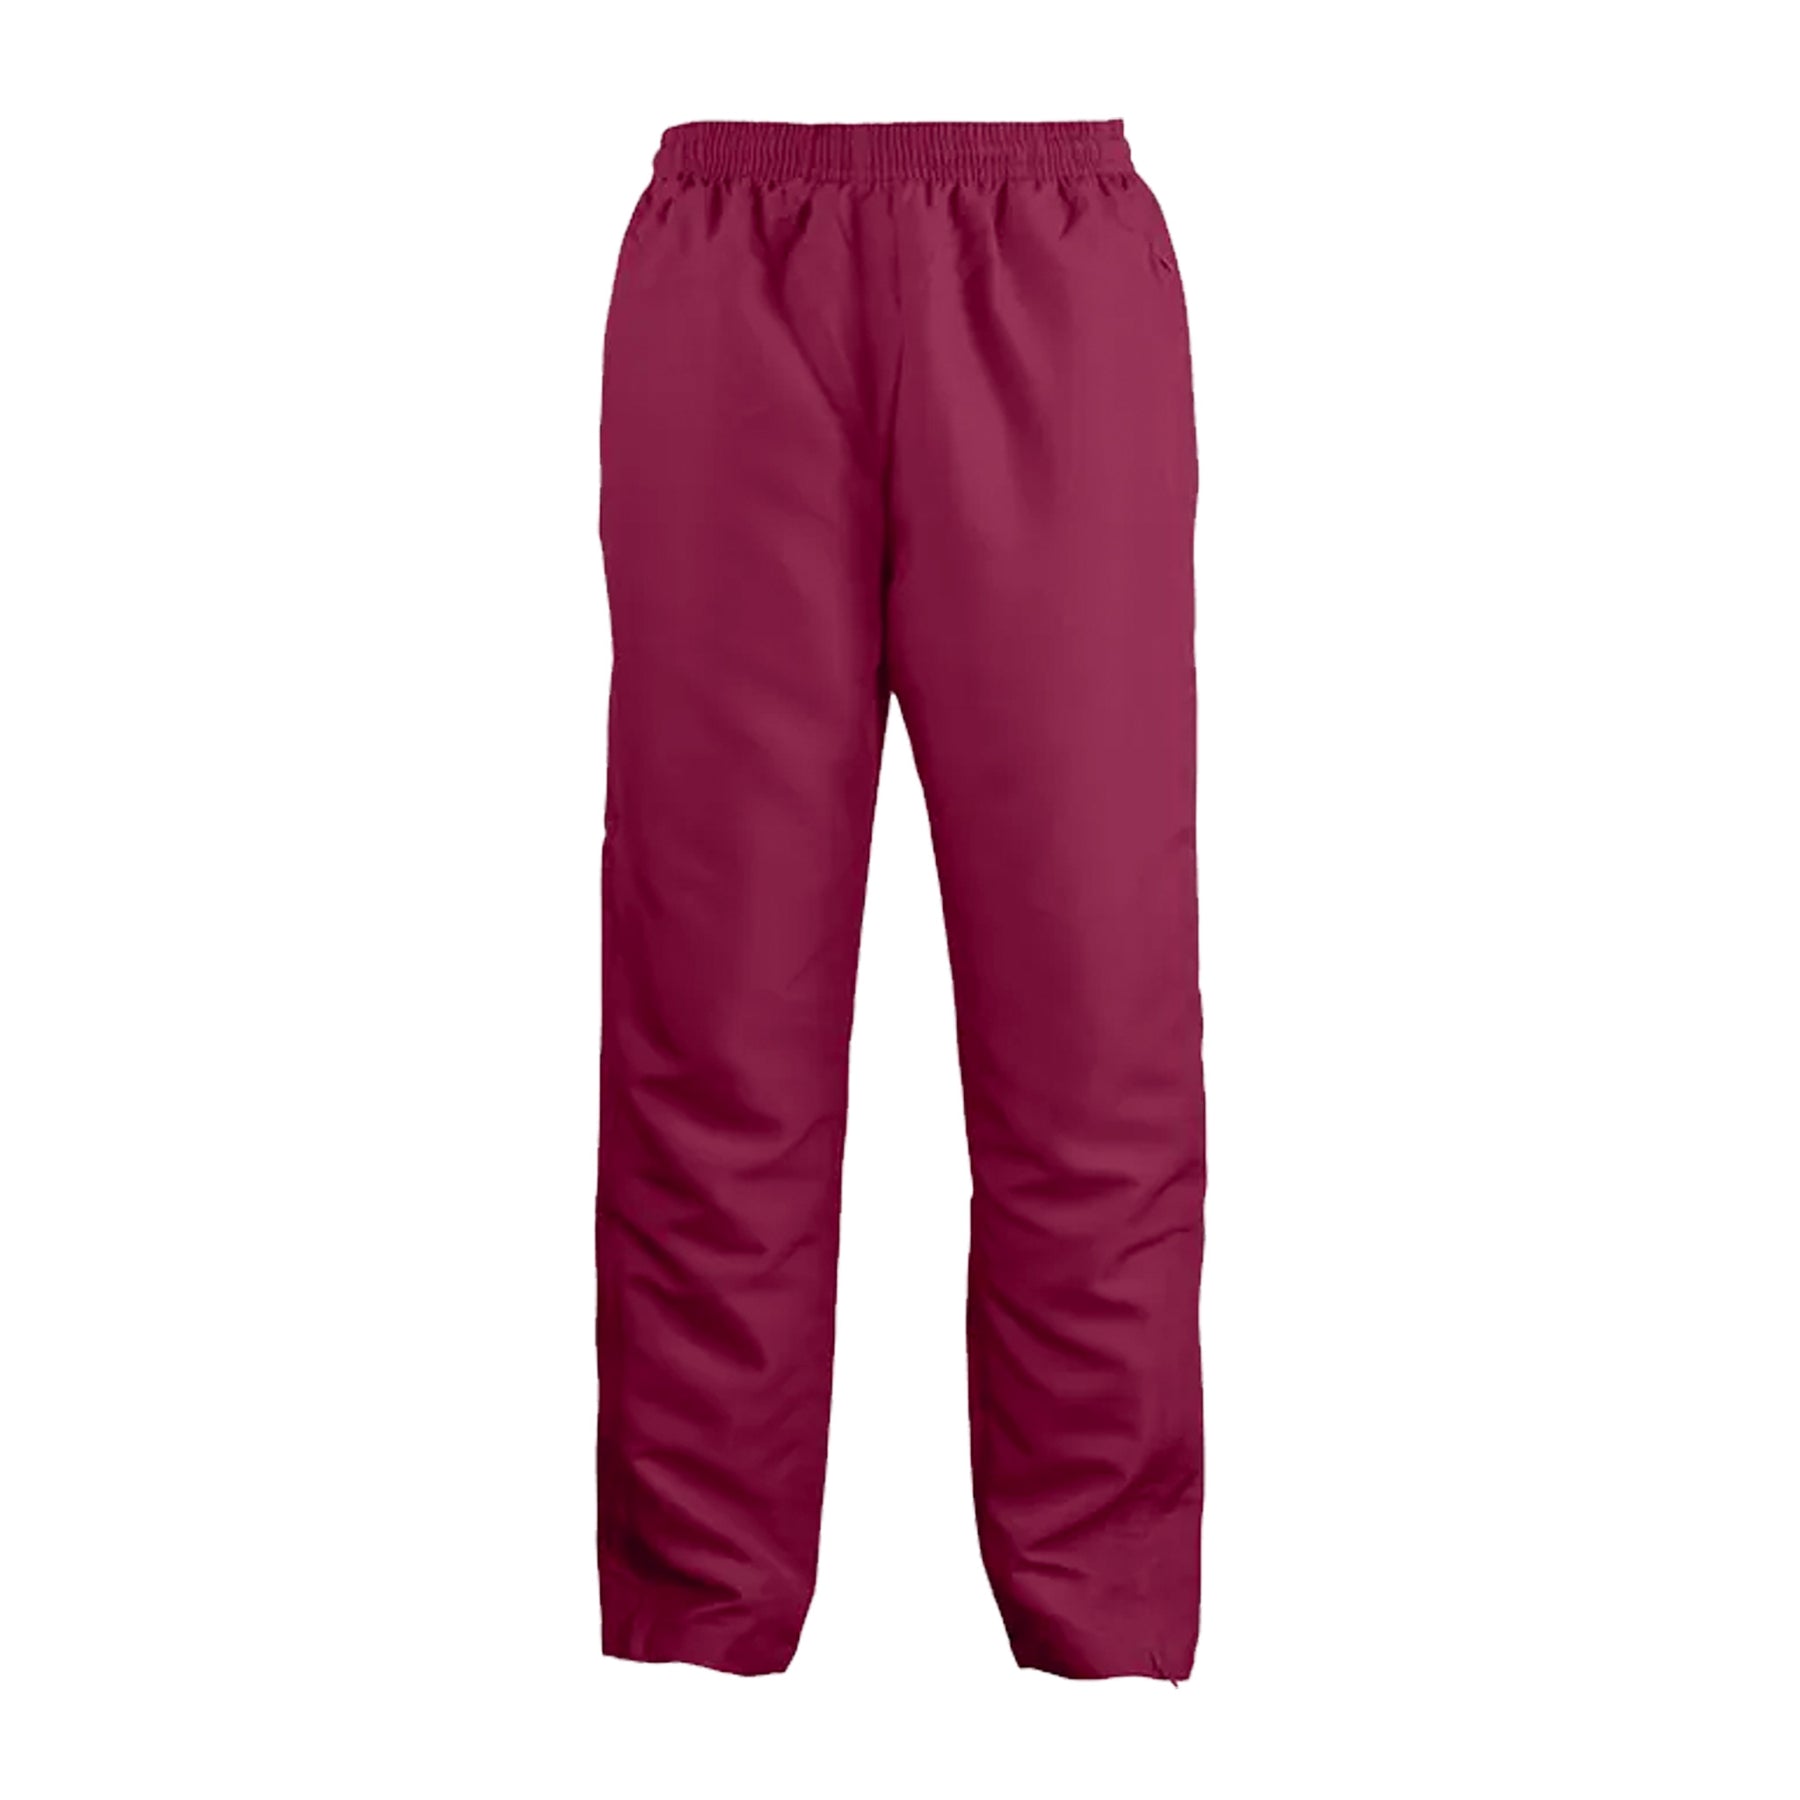 aussie pacific mens trackpants in maroon